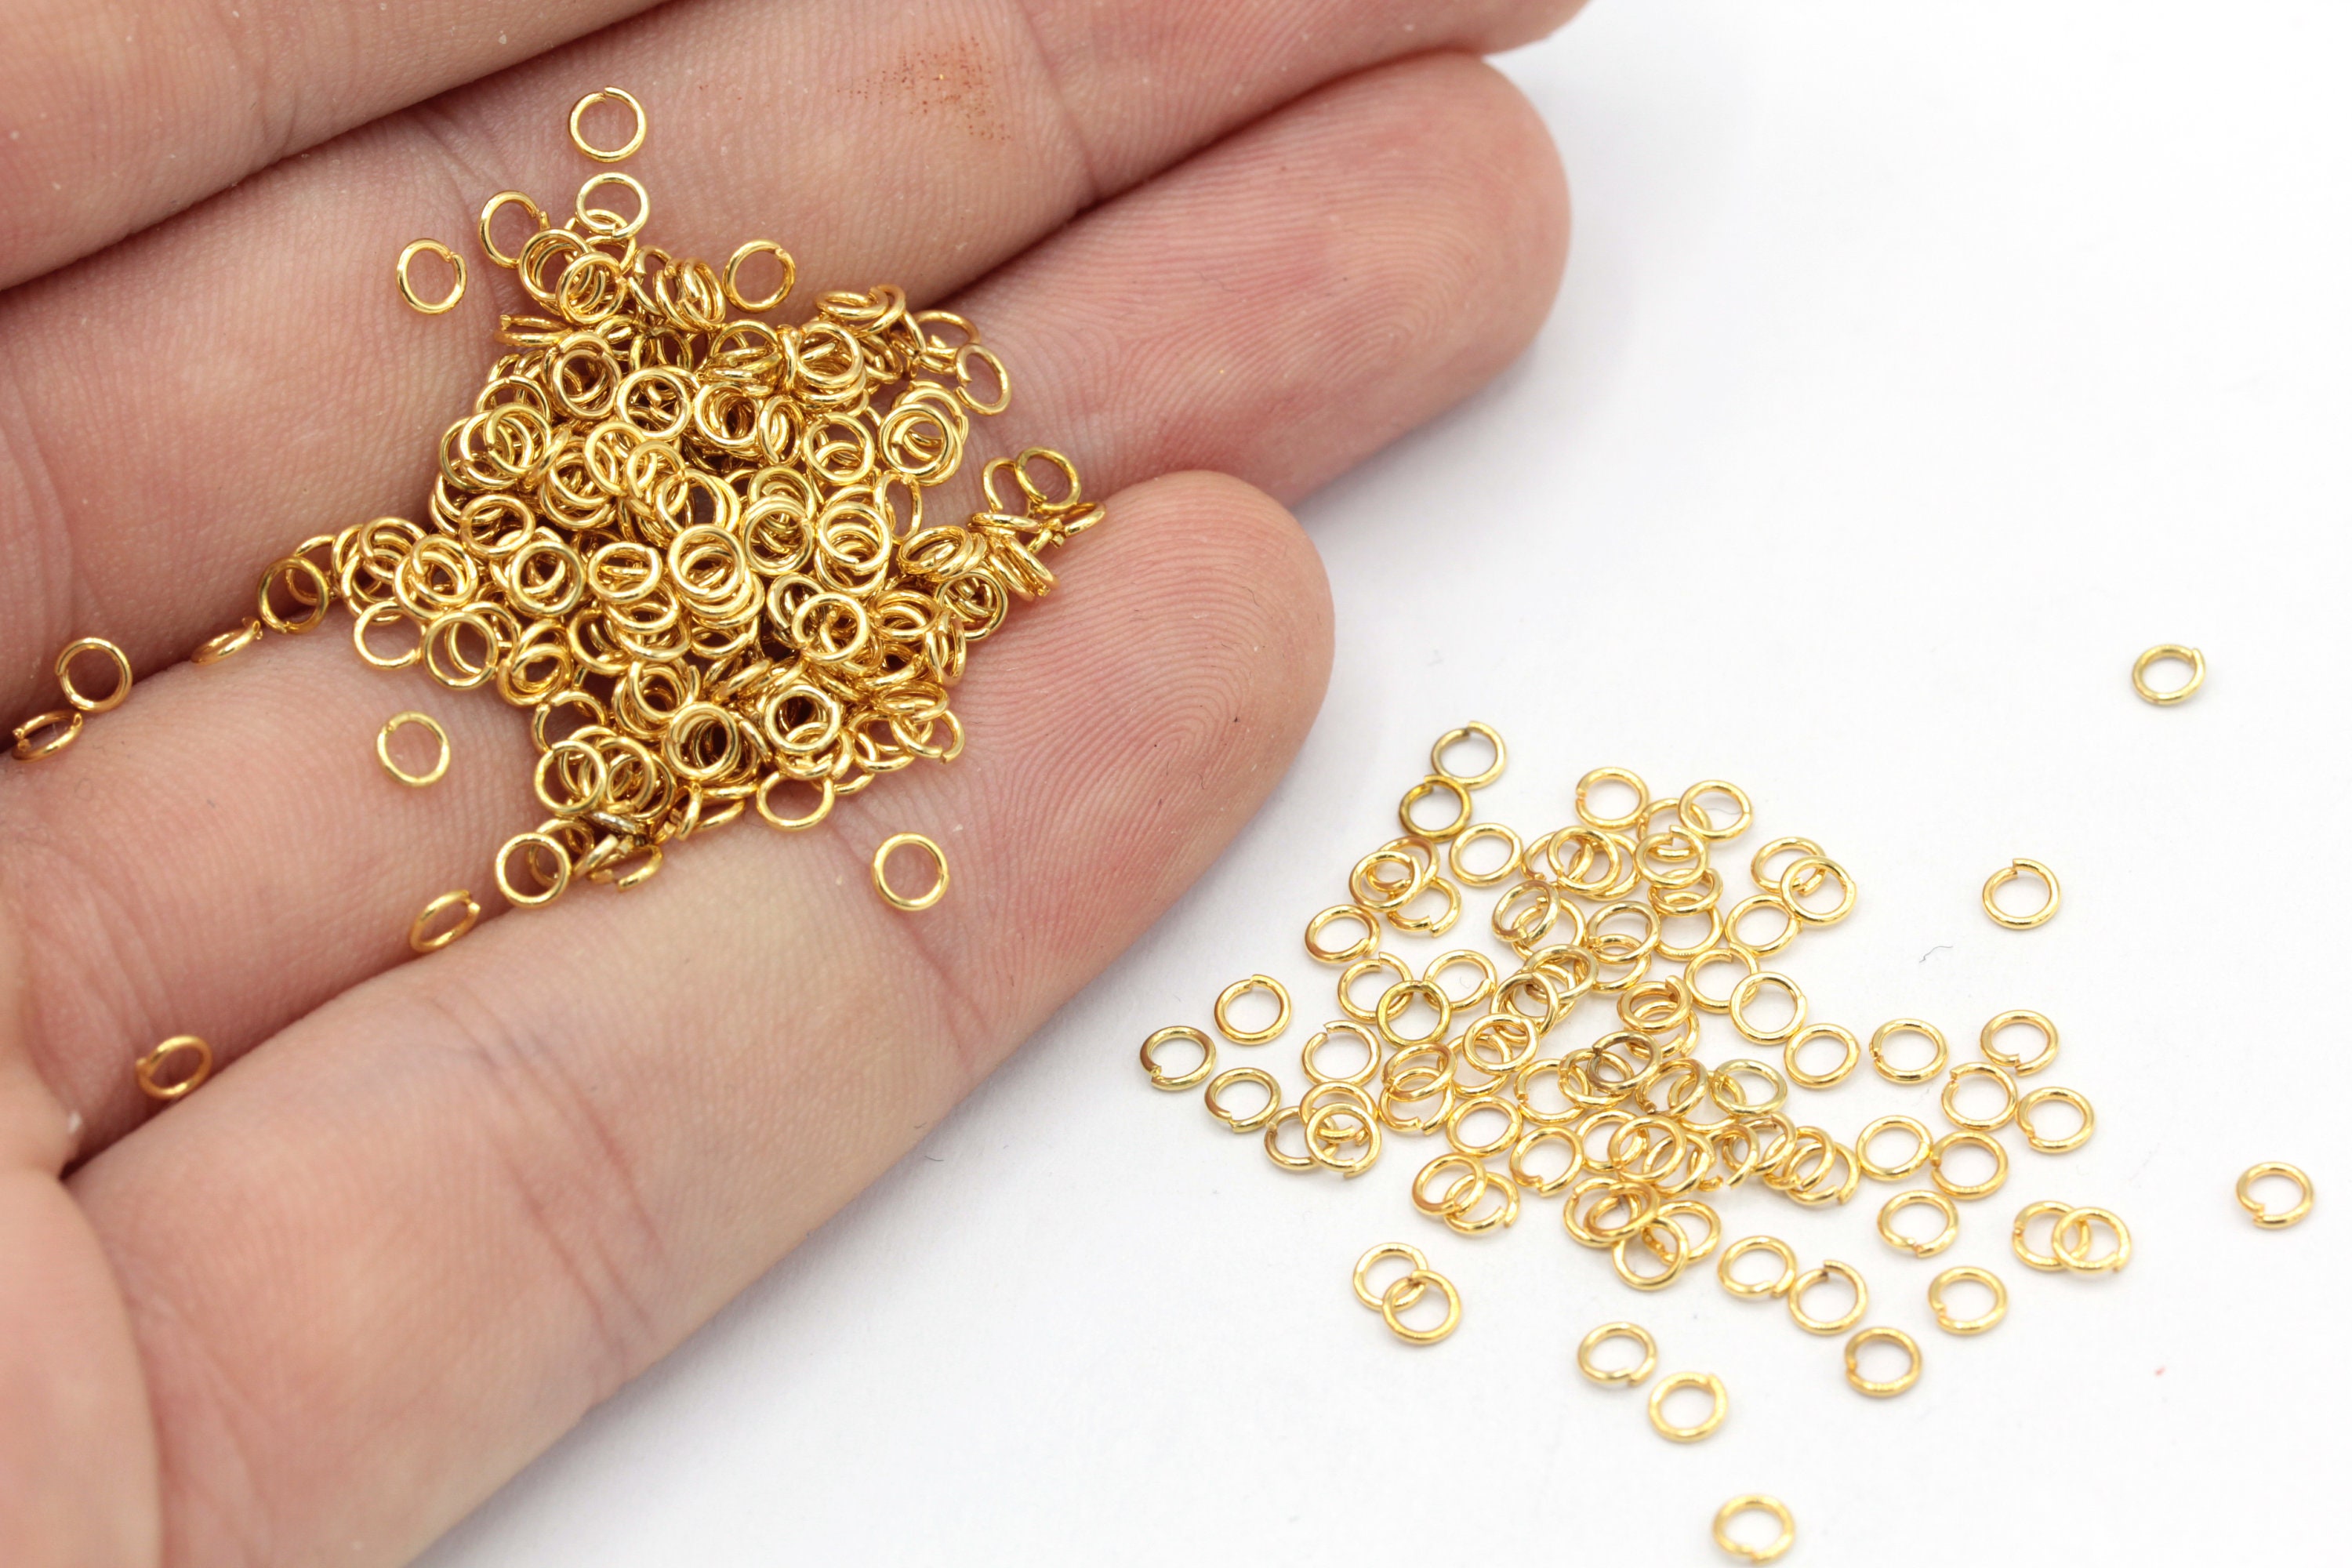 37-391-135 Gold-Filled Jump Ring, Round - 3mm, 24-gauge - Rings & Things